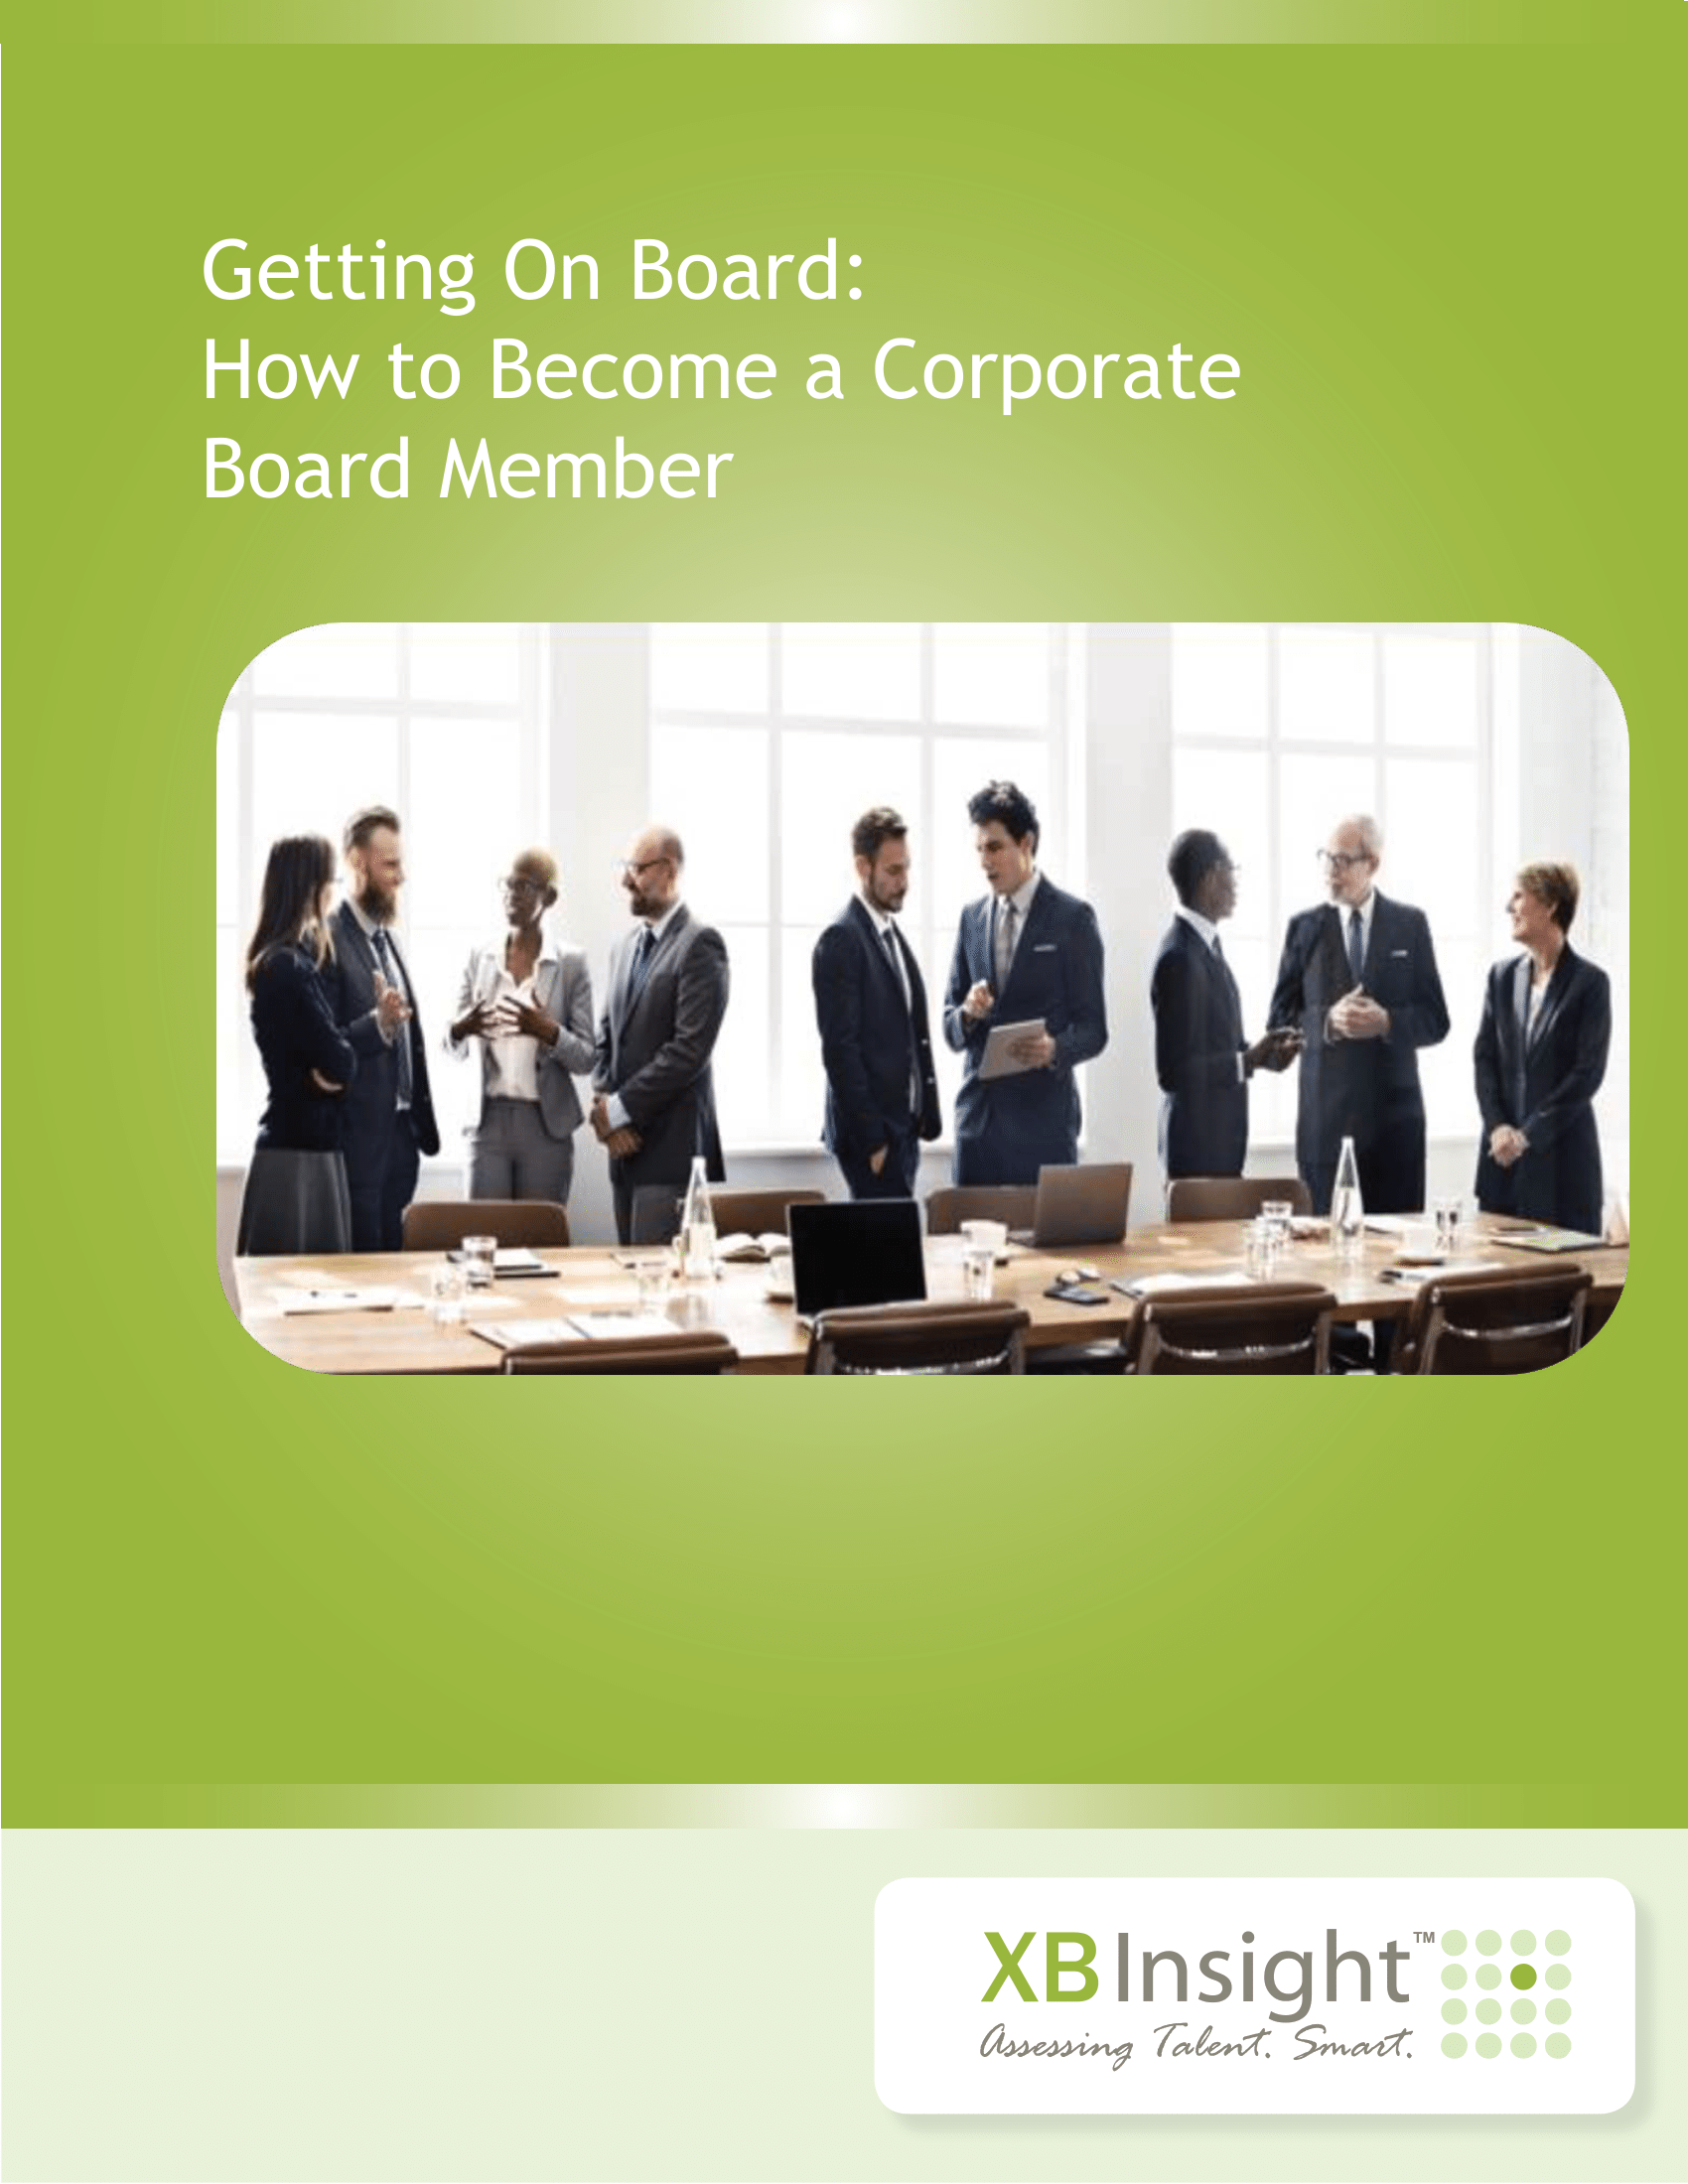 Getting On Board_How to Become a Corporate Board Member_XBInsight-01